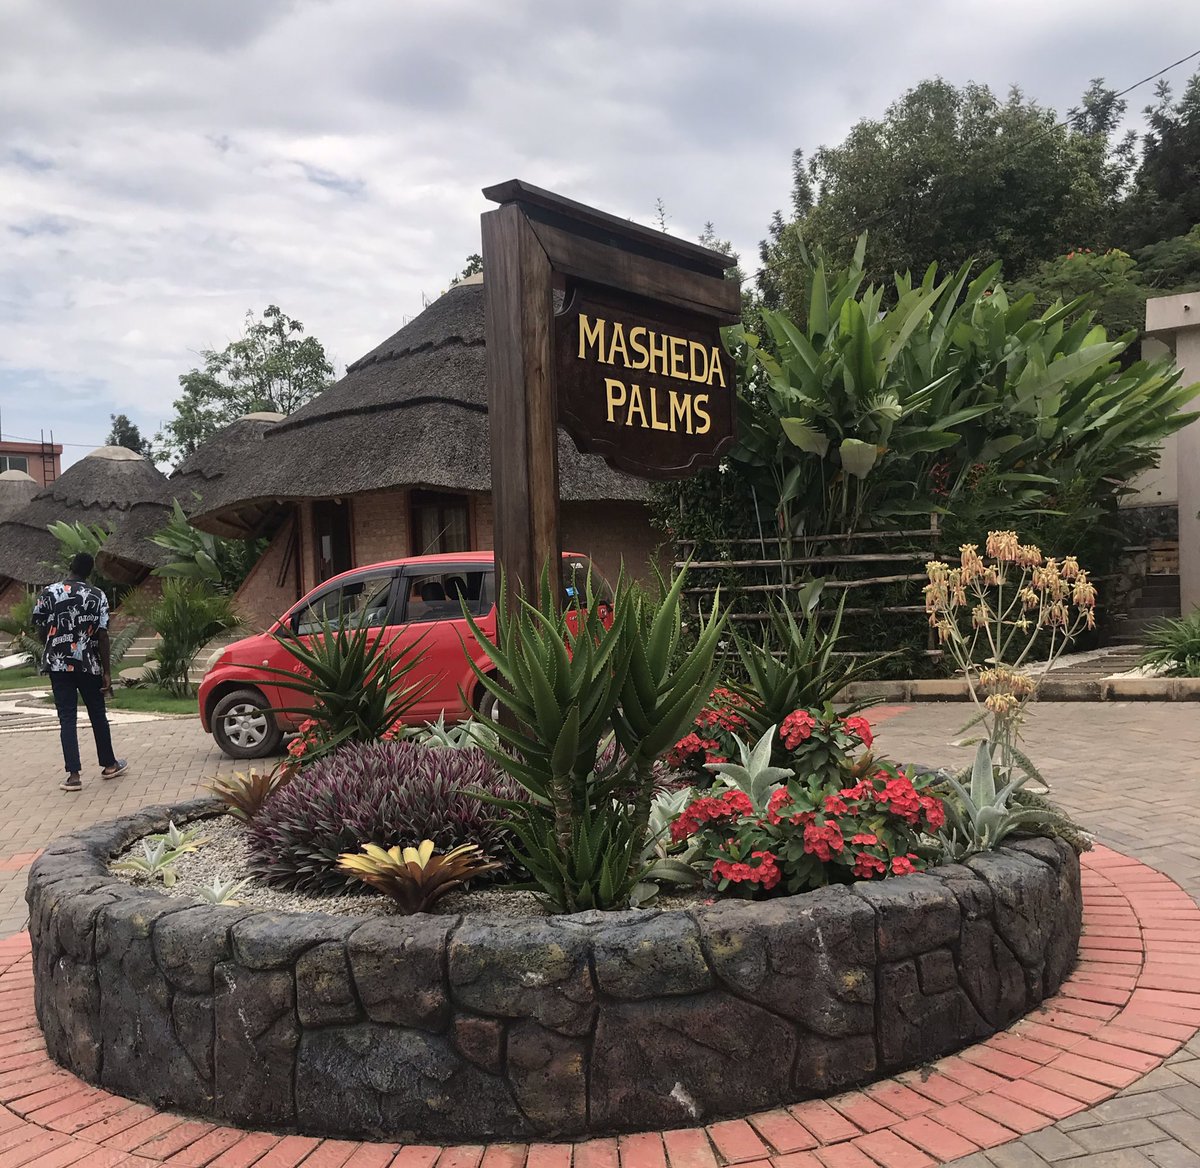 If you are looking for a place to relax and enjoy beautiful scenery, no need to travel long distances, @MashedaPalms is the place for you.
Located in Buyala on Mityana road, every thing in this place is a work of art